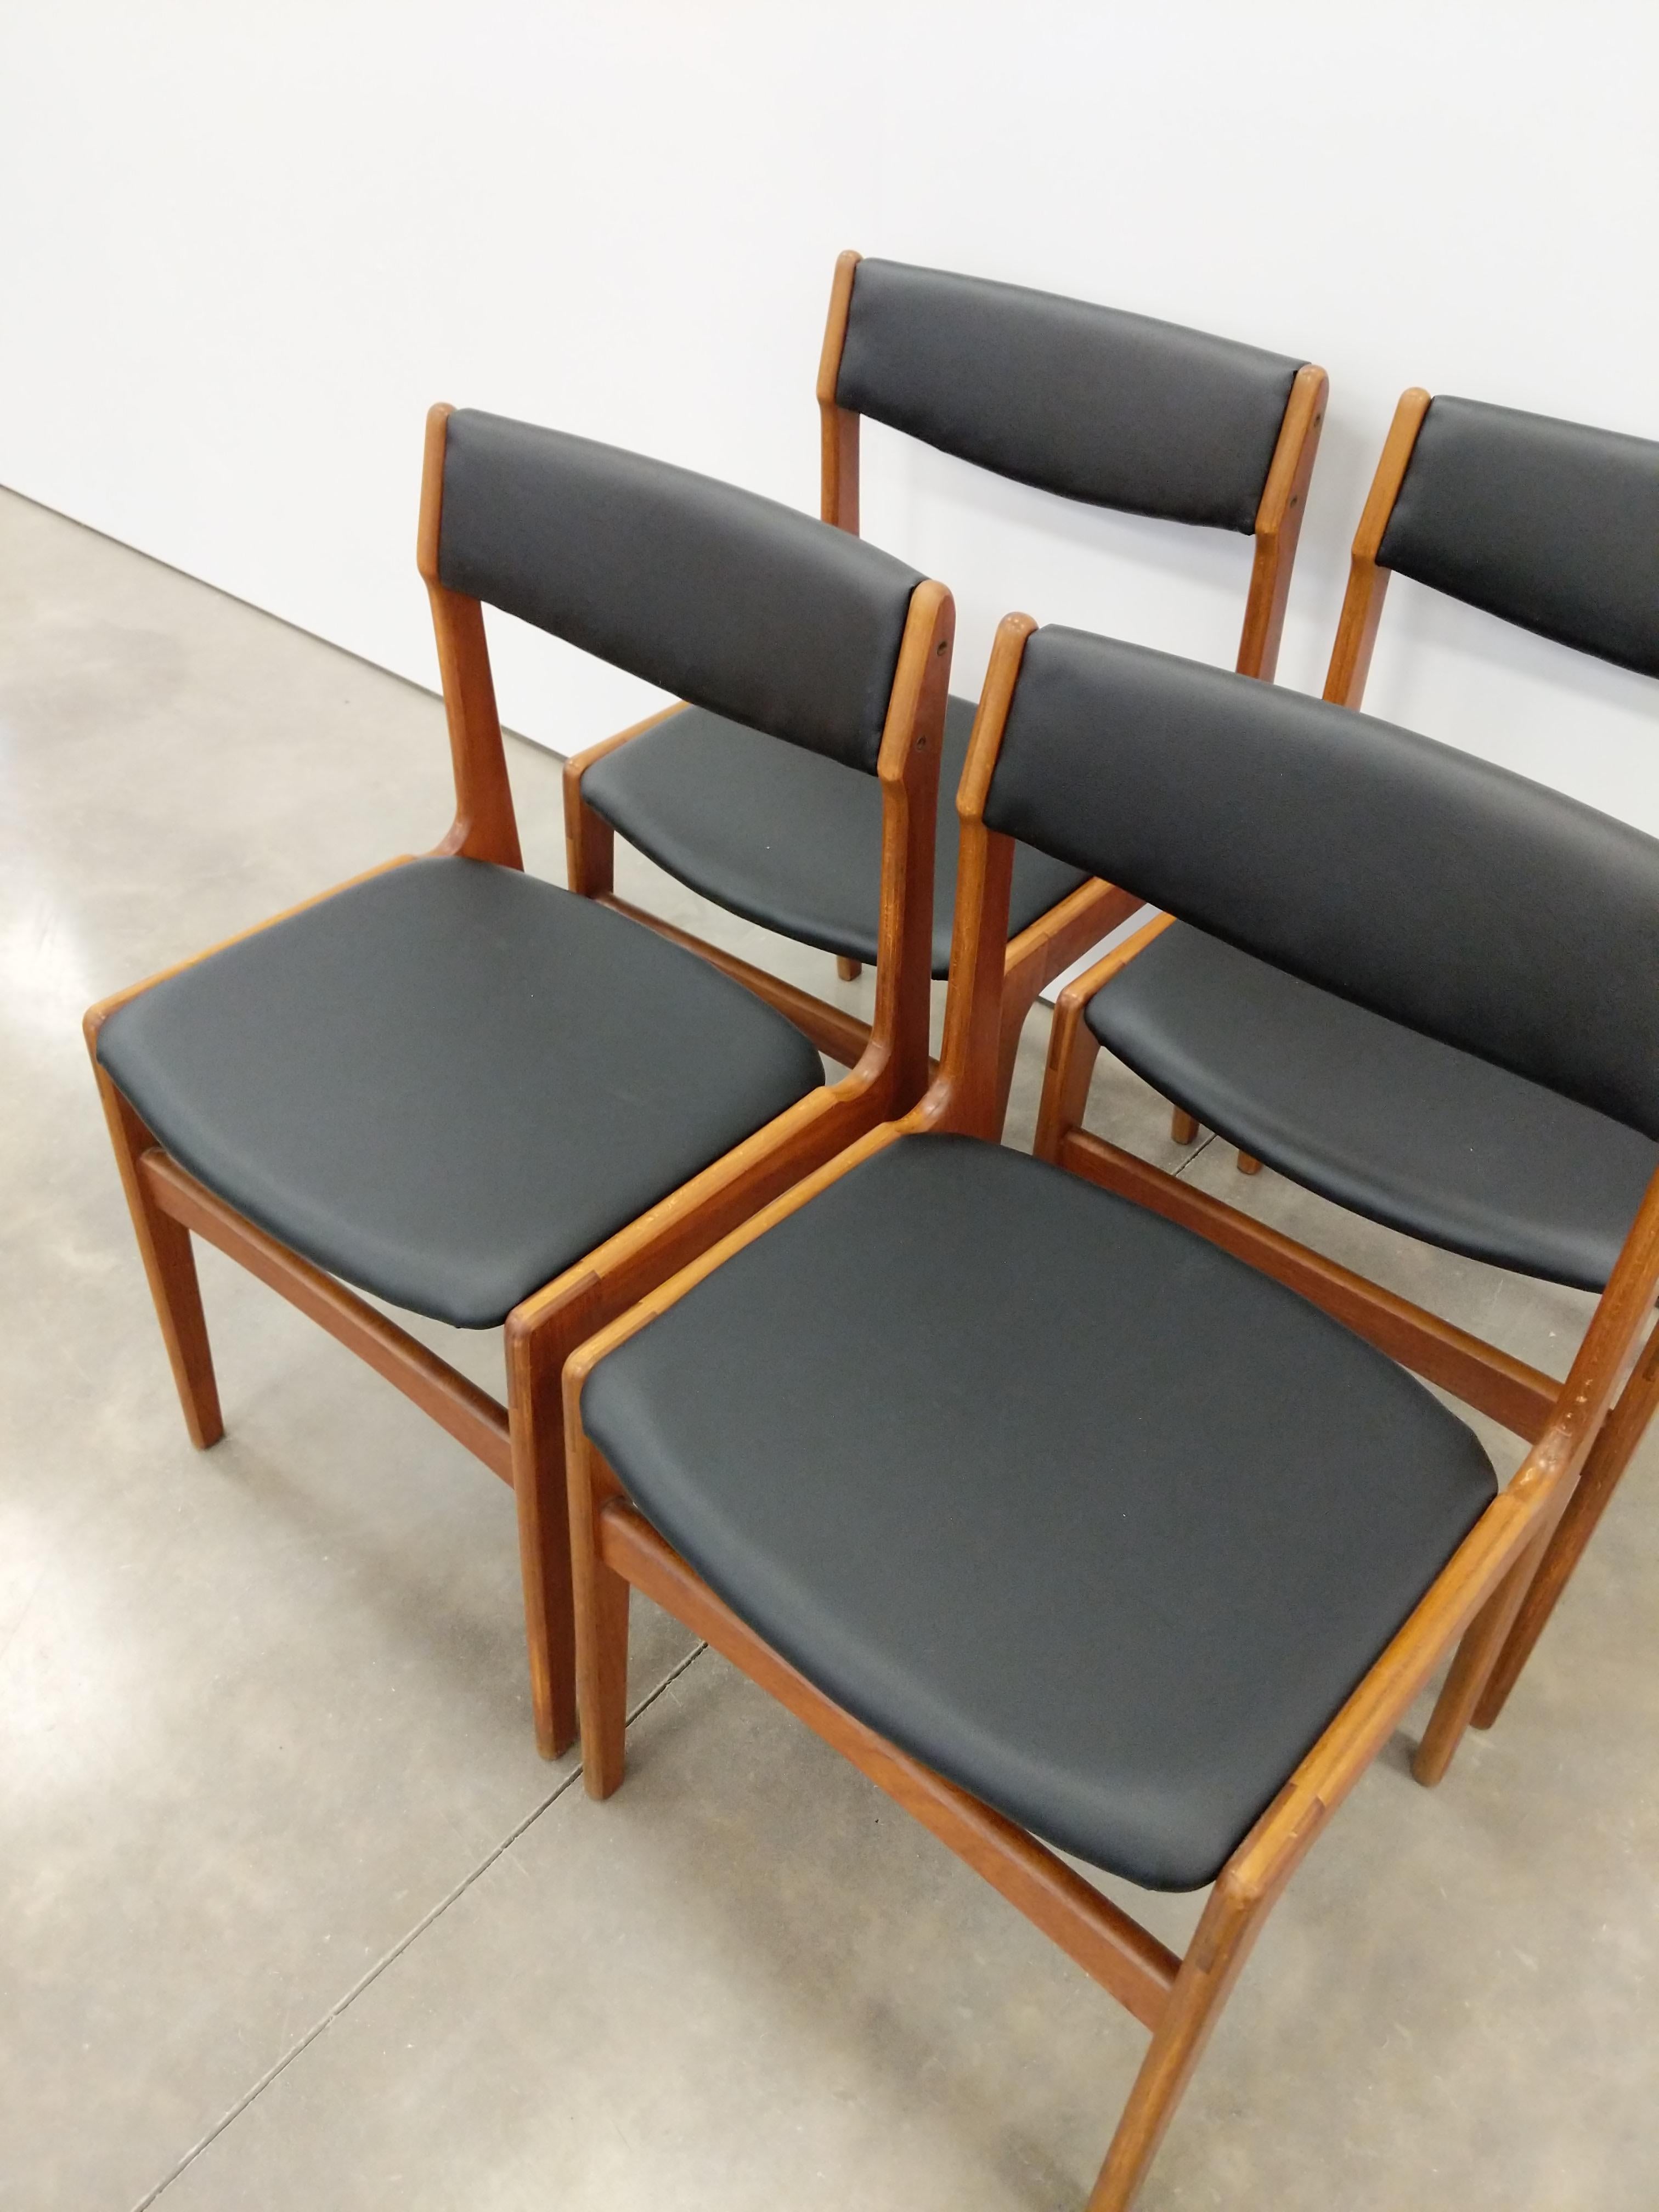 Wood Set of 4 Vintage Danish Modern Dining Chairs